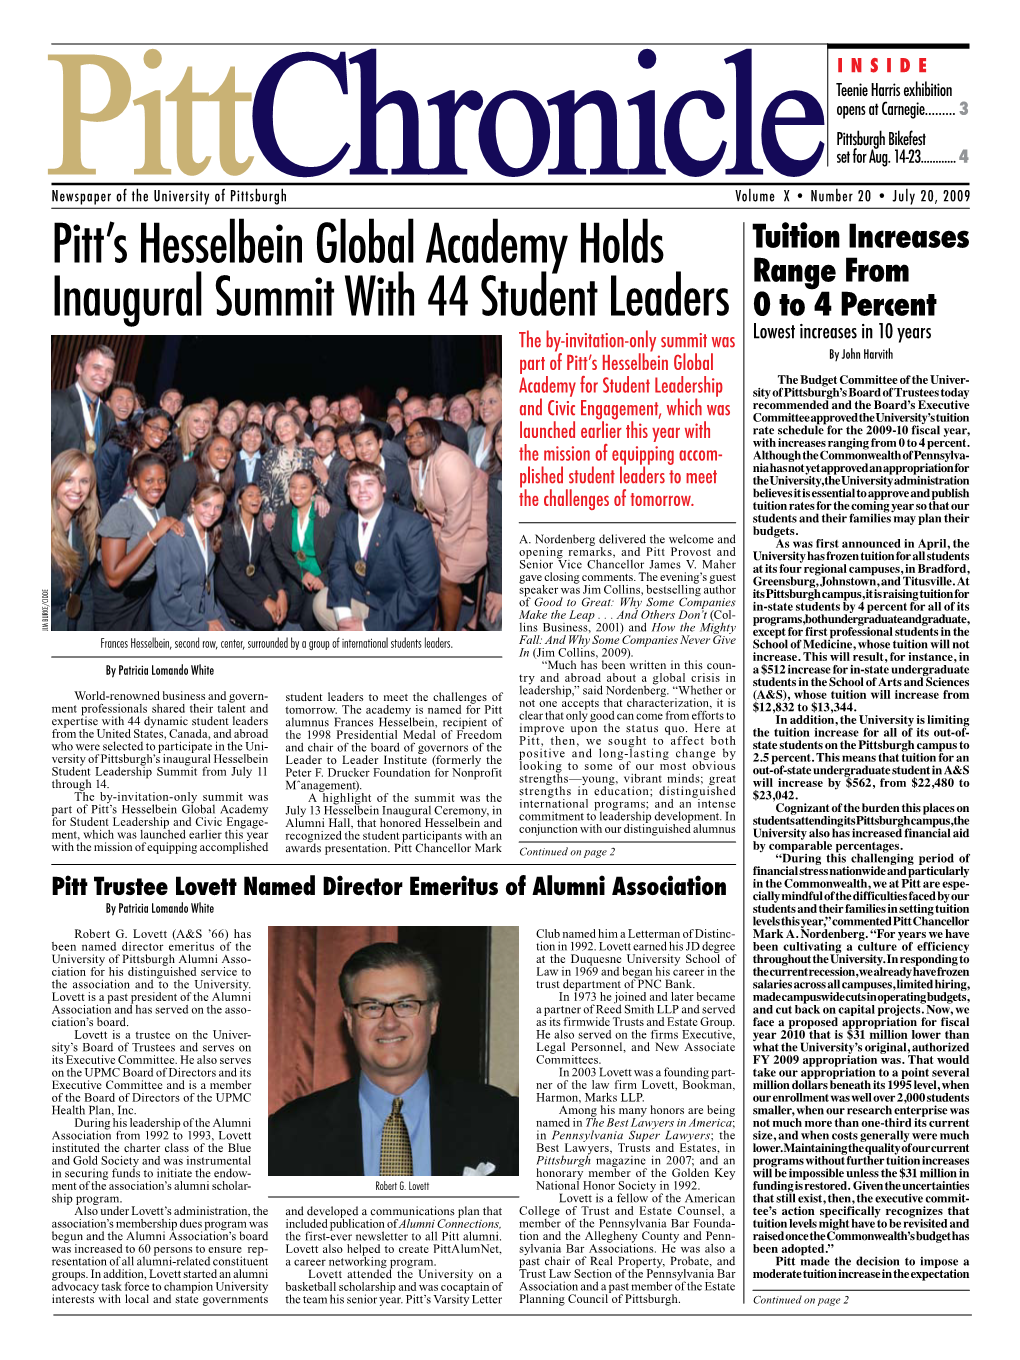 Pitt's Hesselbein Global Academy Holds Inaugural Summit with 44